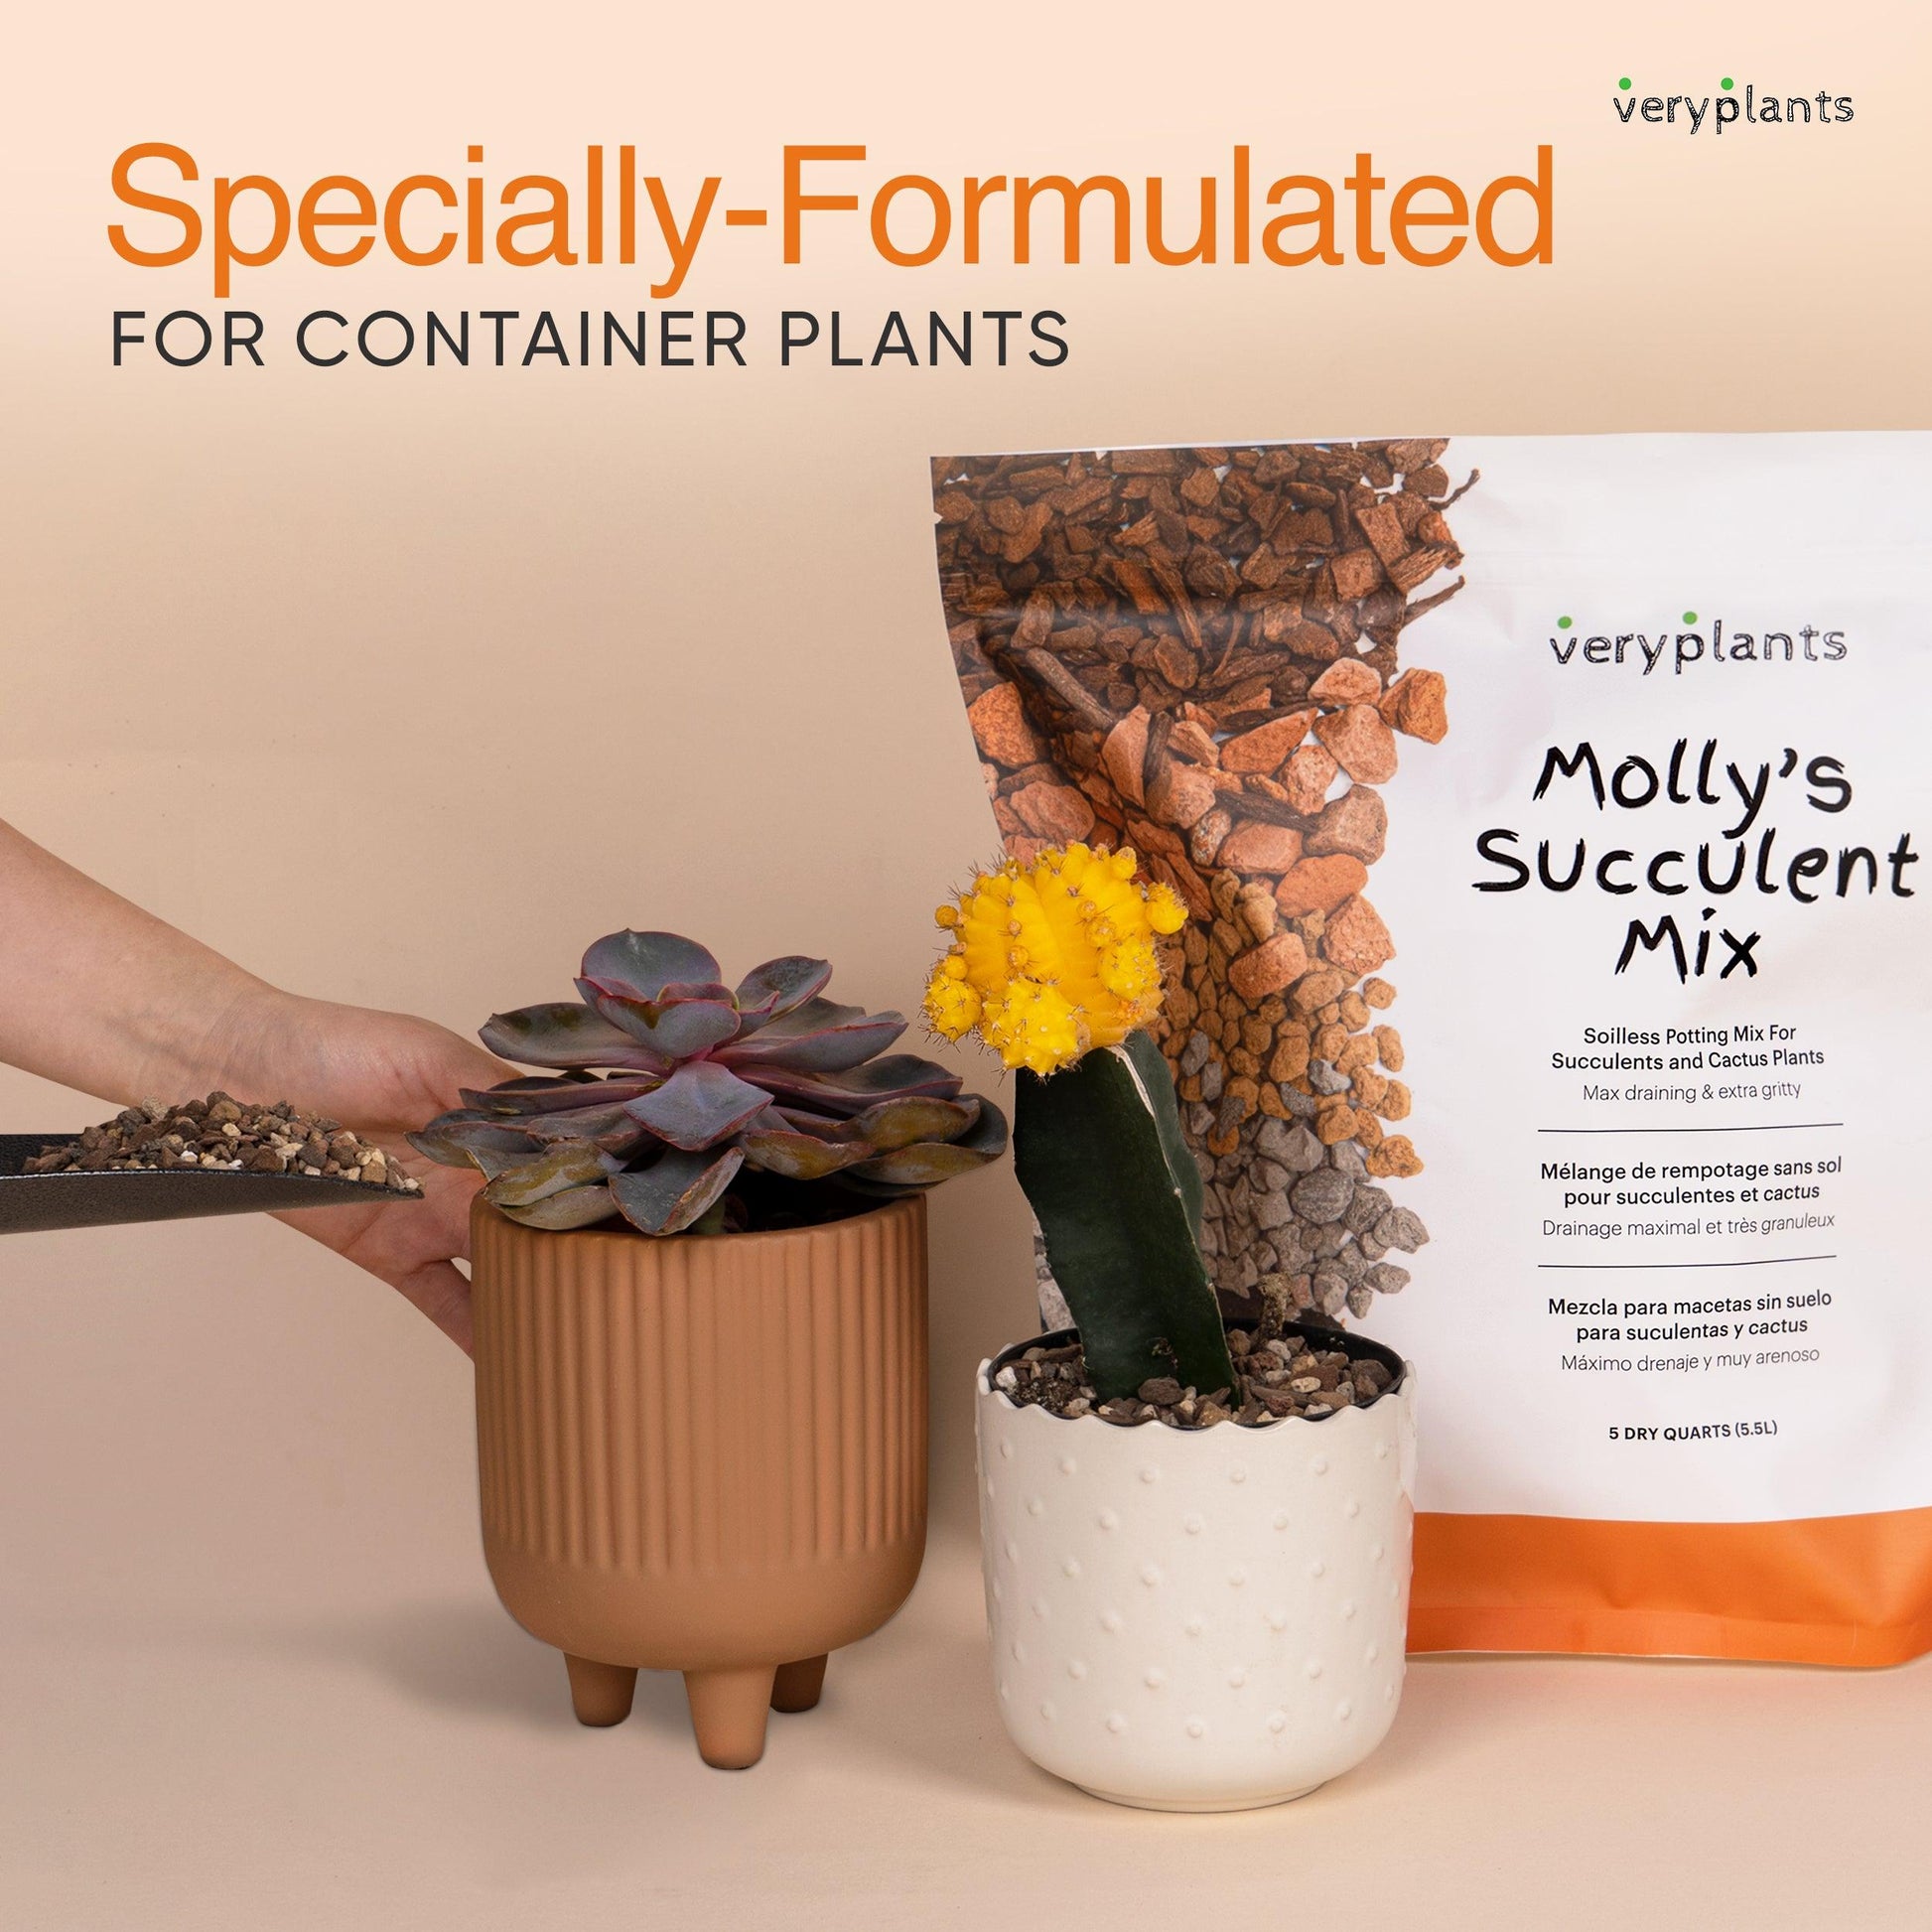 Molly's Succulent Mix - Premium Gritty Soilless Potting Mix for Succulents, Cactus and Bonsai - VERYPLANTS